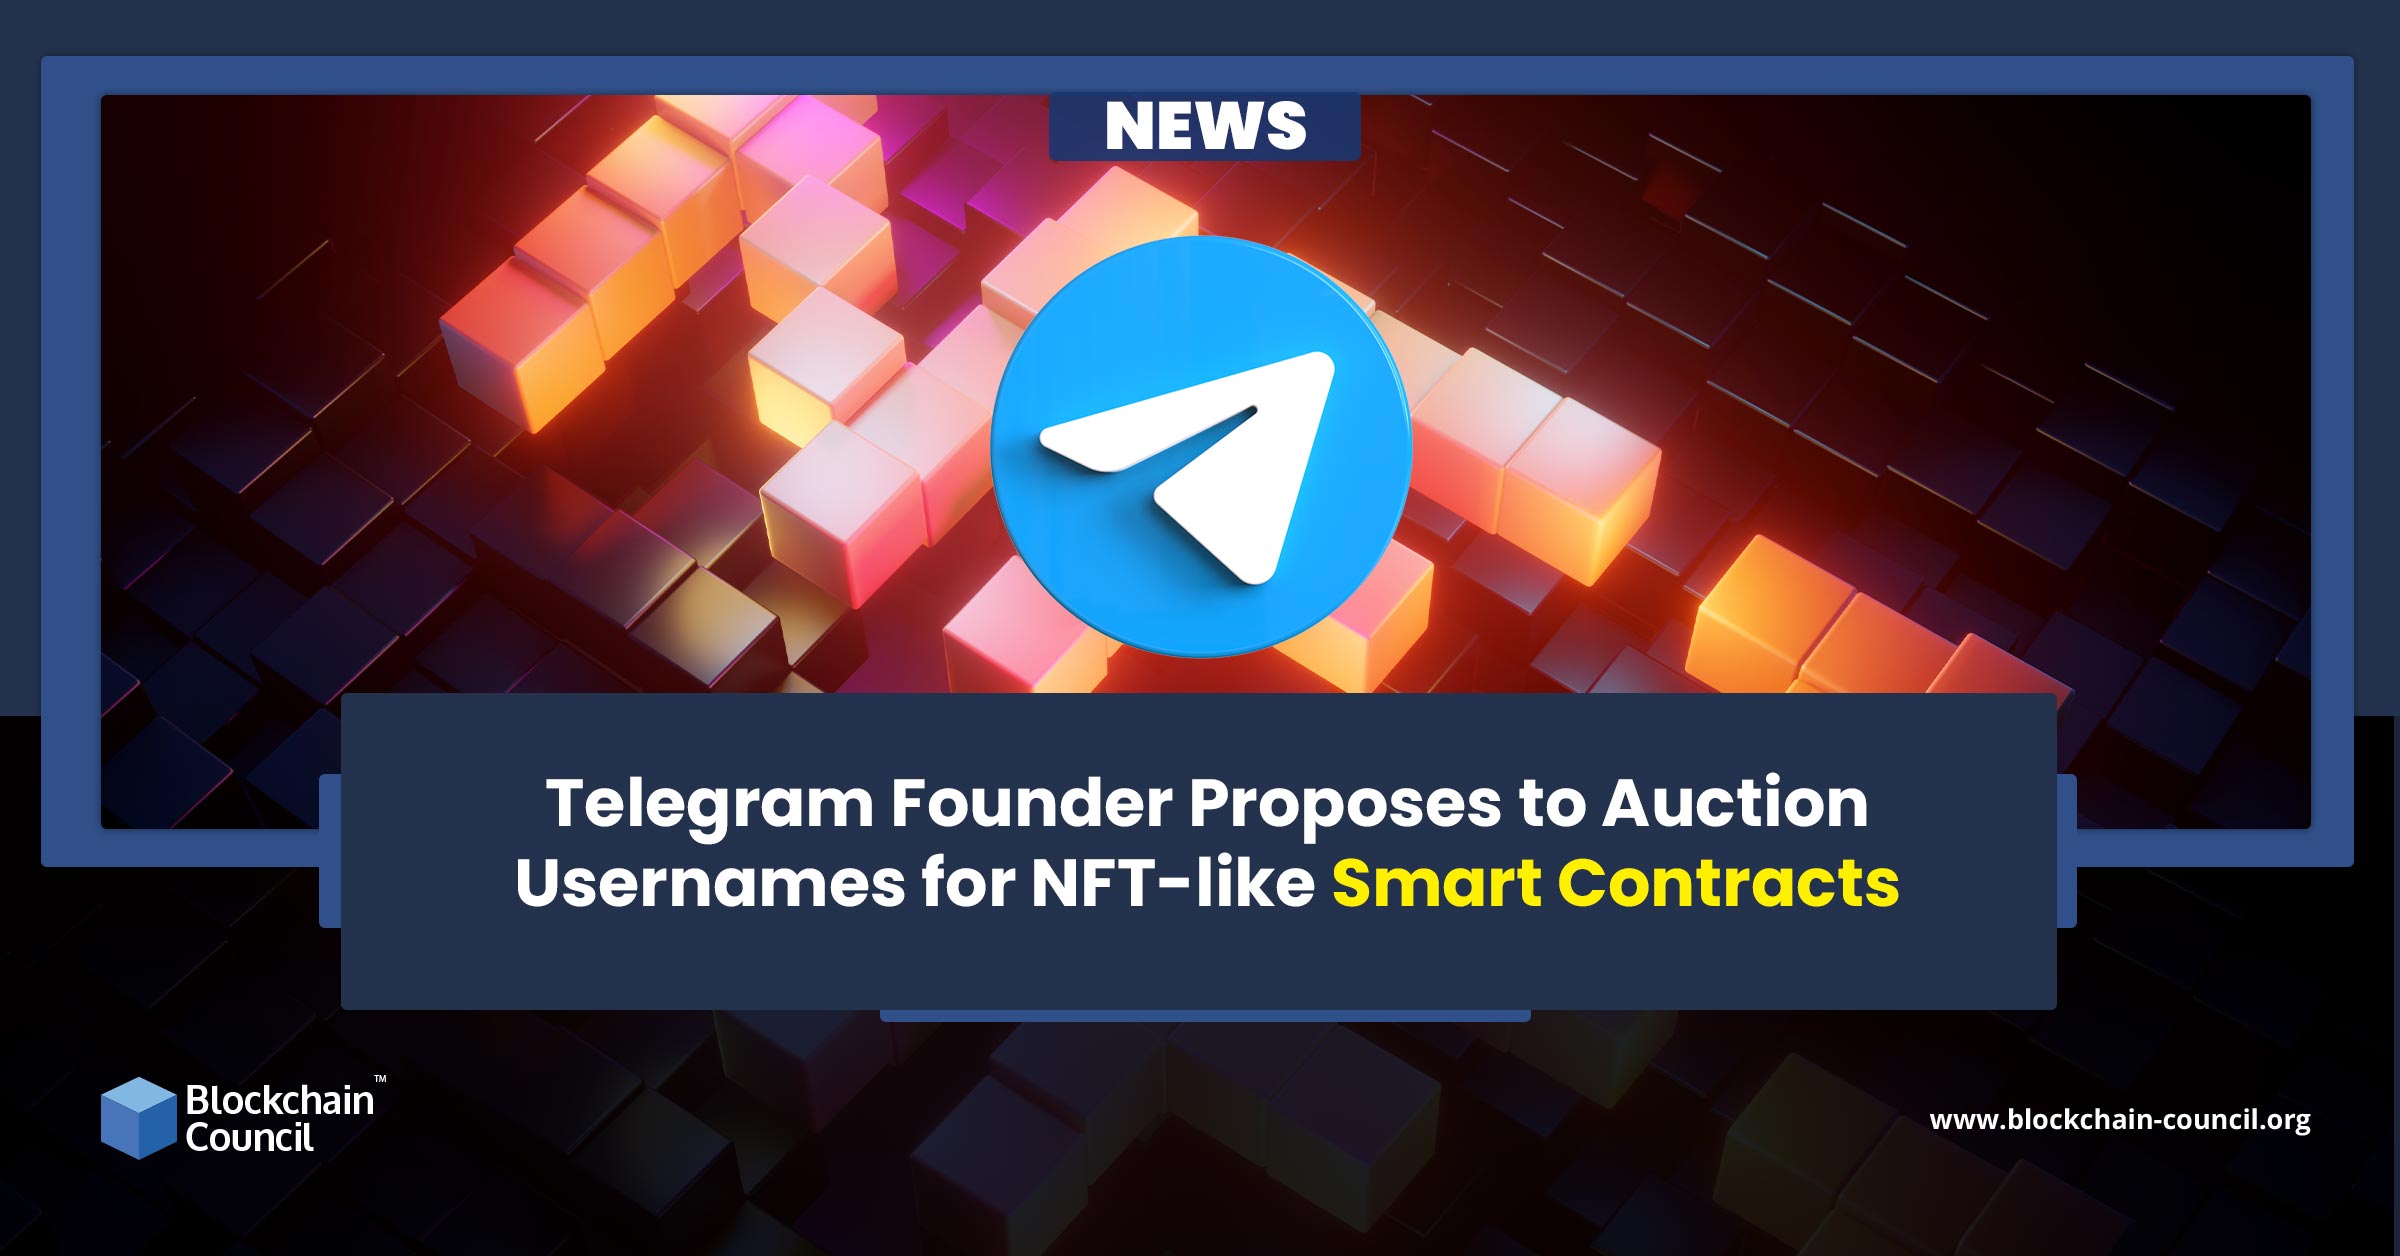 Telegram Founder Proposes to Auction Usernames for NFT-like Smart Contracts